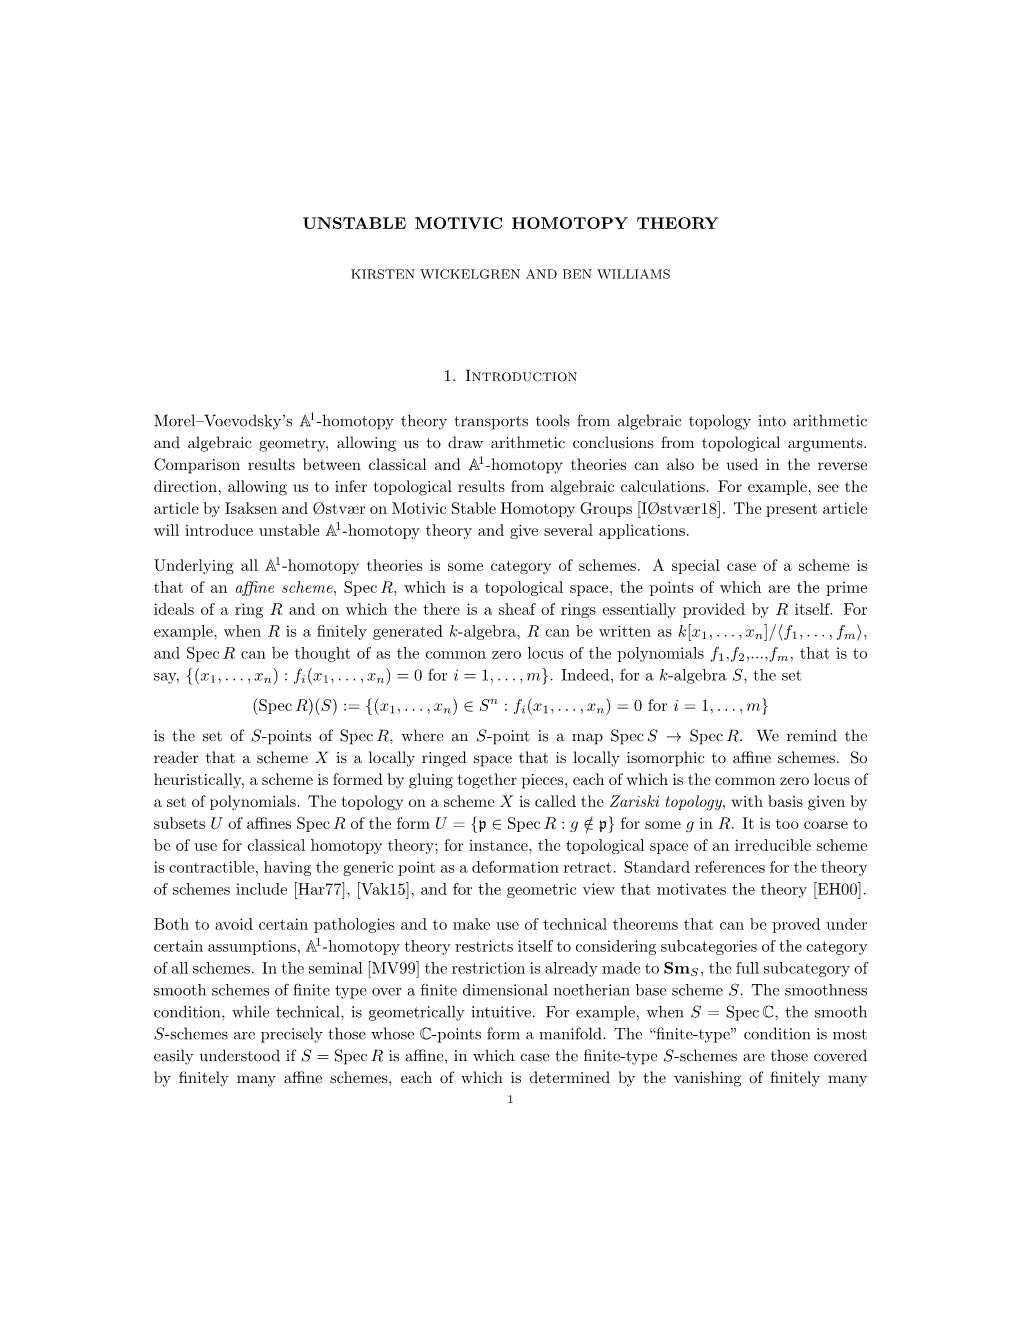 UNSTABLE MOTIVIC HOMOTOPY THEORY 1. Introduction Morel